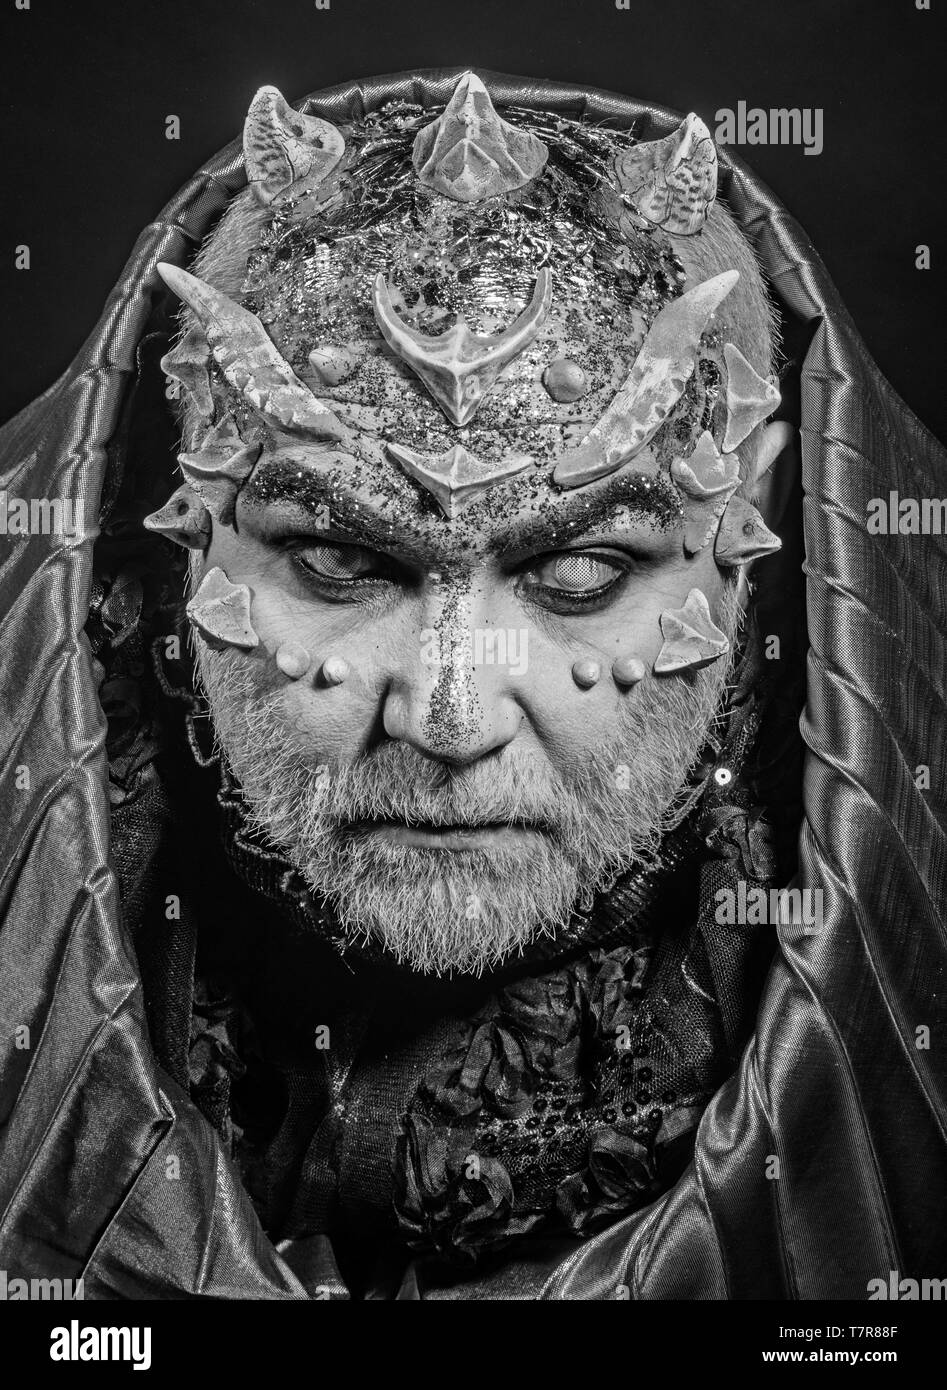 Man with thorns or warts, face covered with glitters. Demon with golden hood on black background. Senior man with white beard dressed like monster Stock Photo